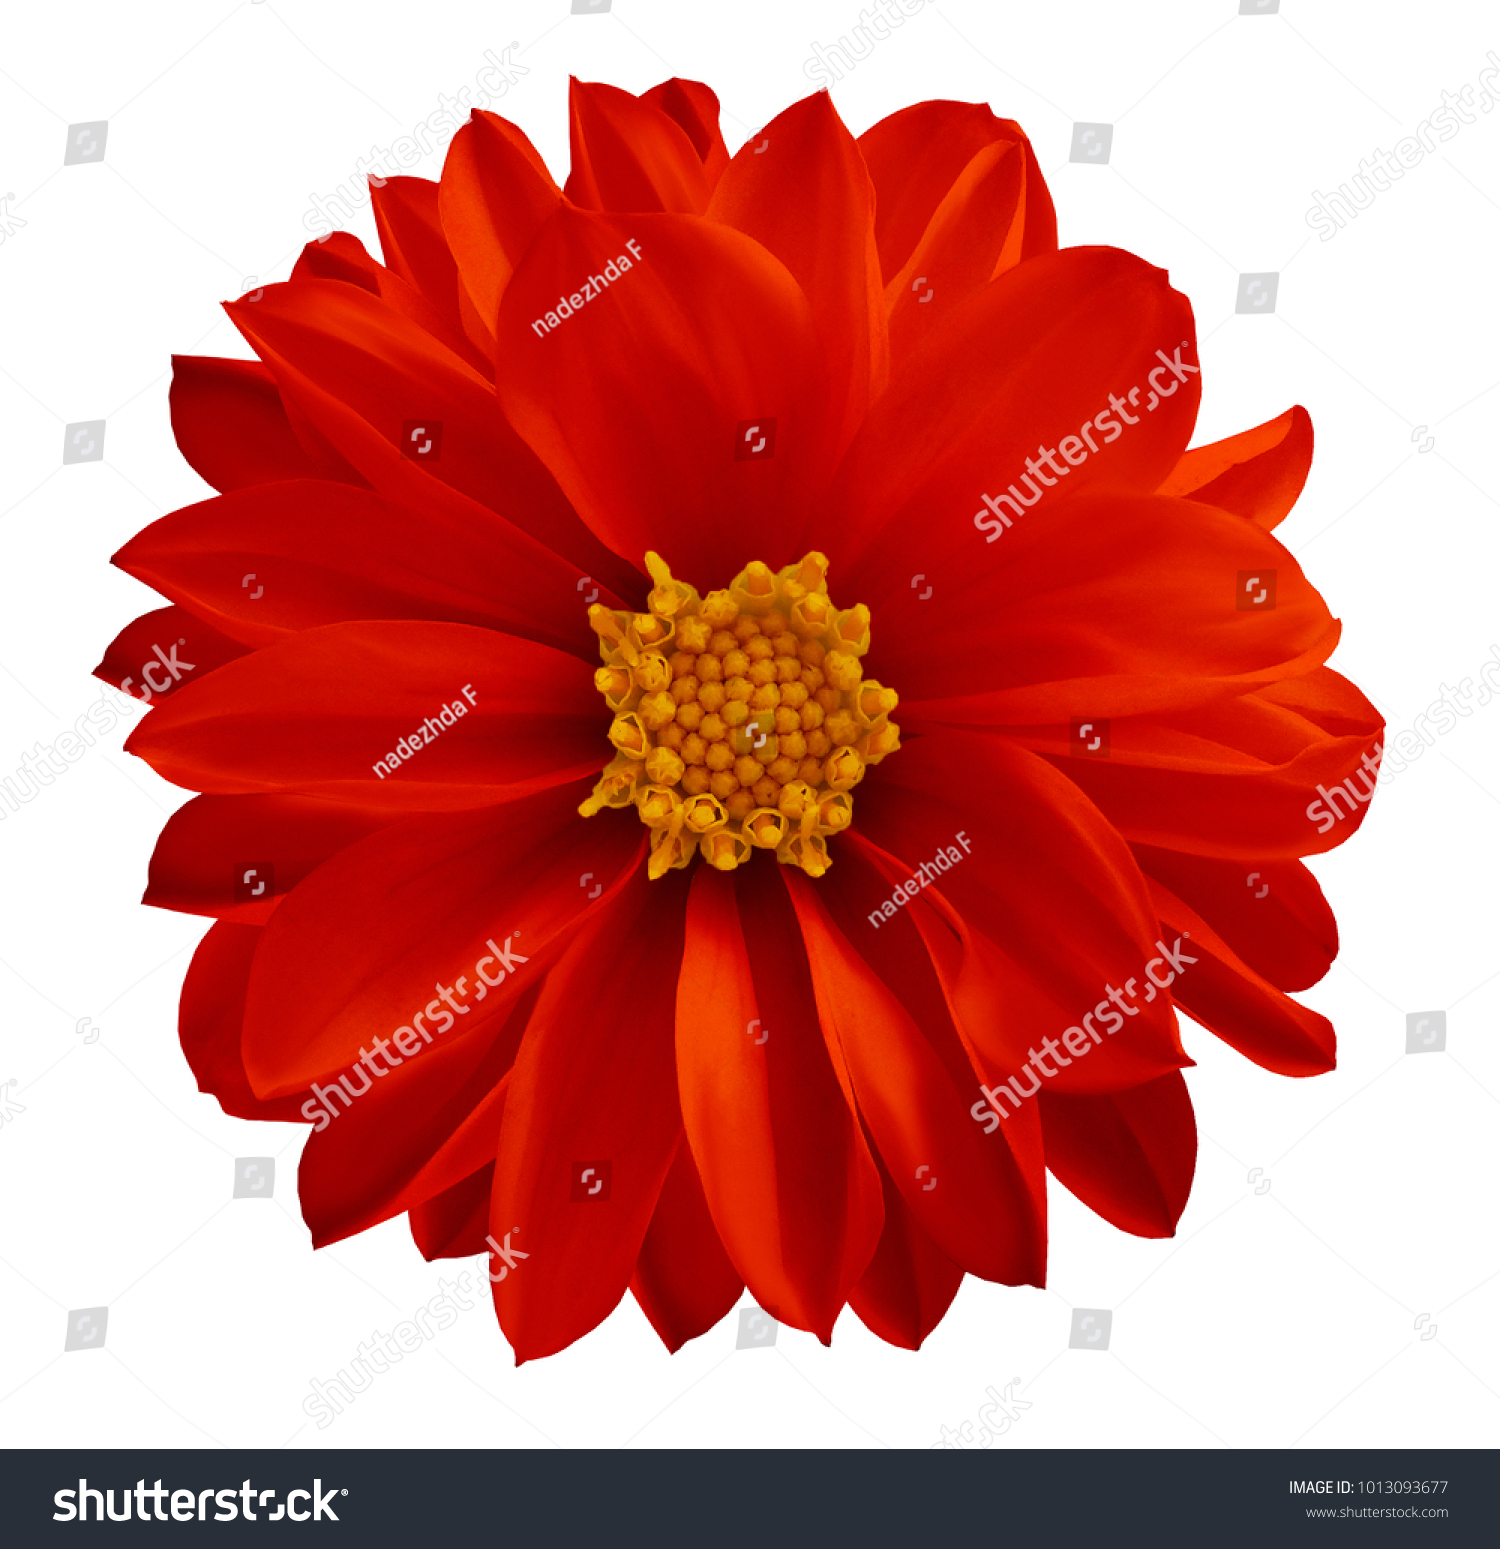 Dahlia Red Flower On White Isolated Stock Photo 1013093677 ...